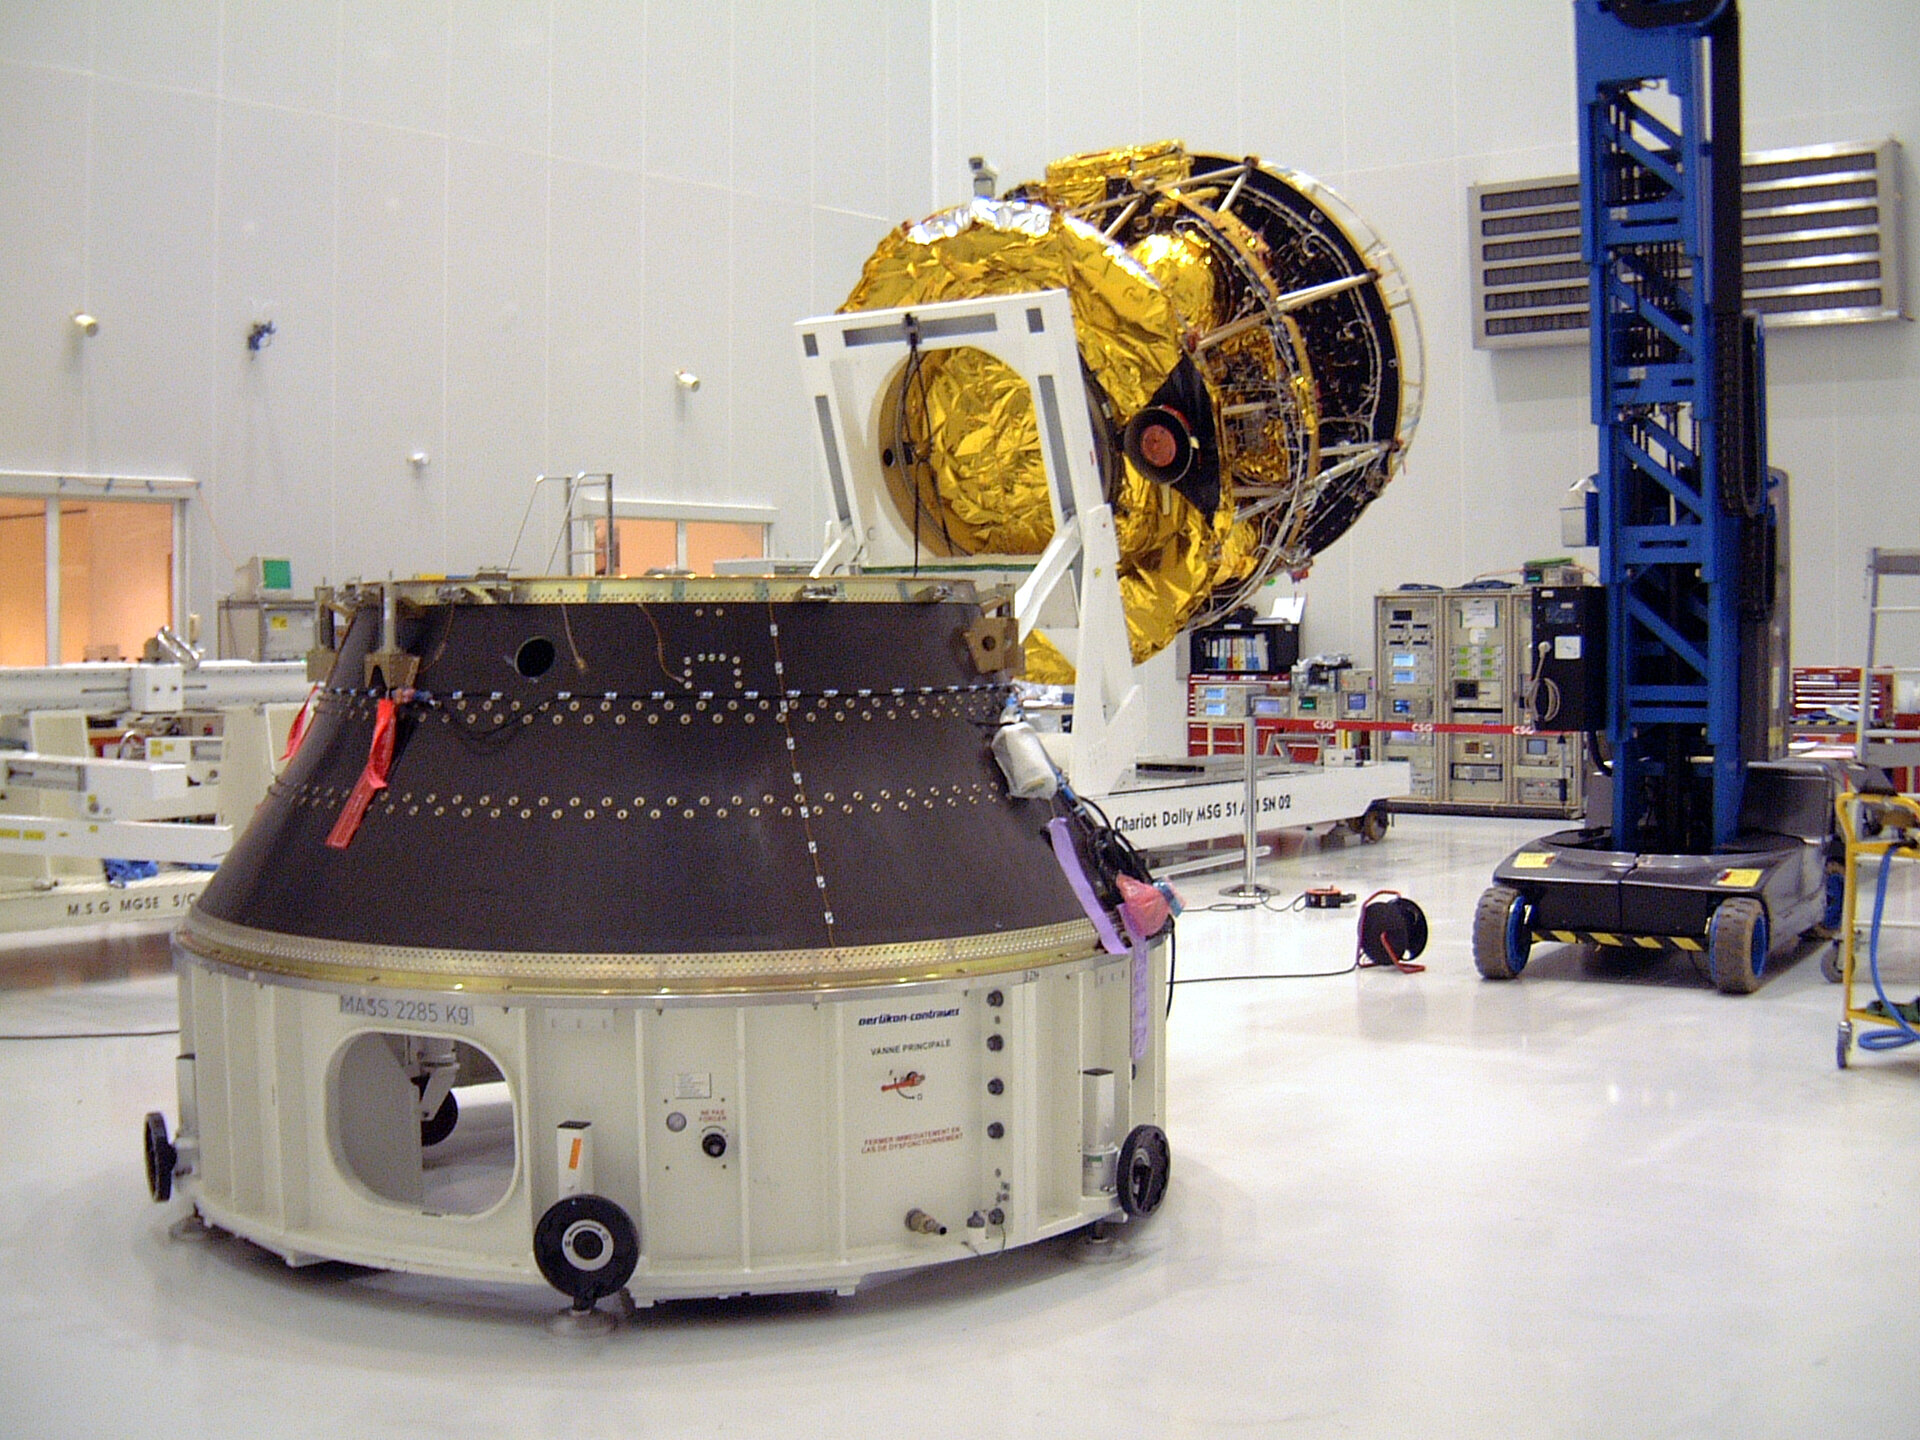 MSG-2 payload adaptor